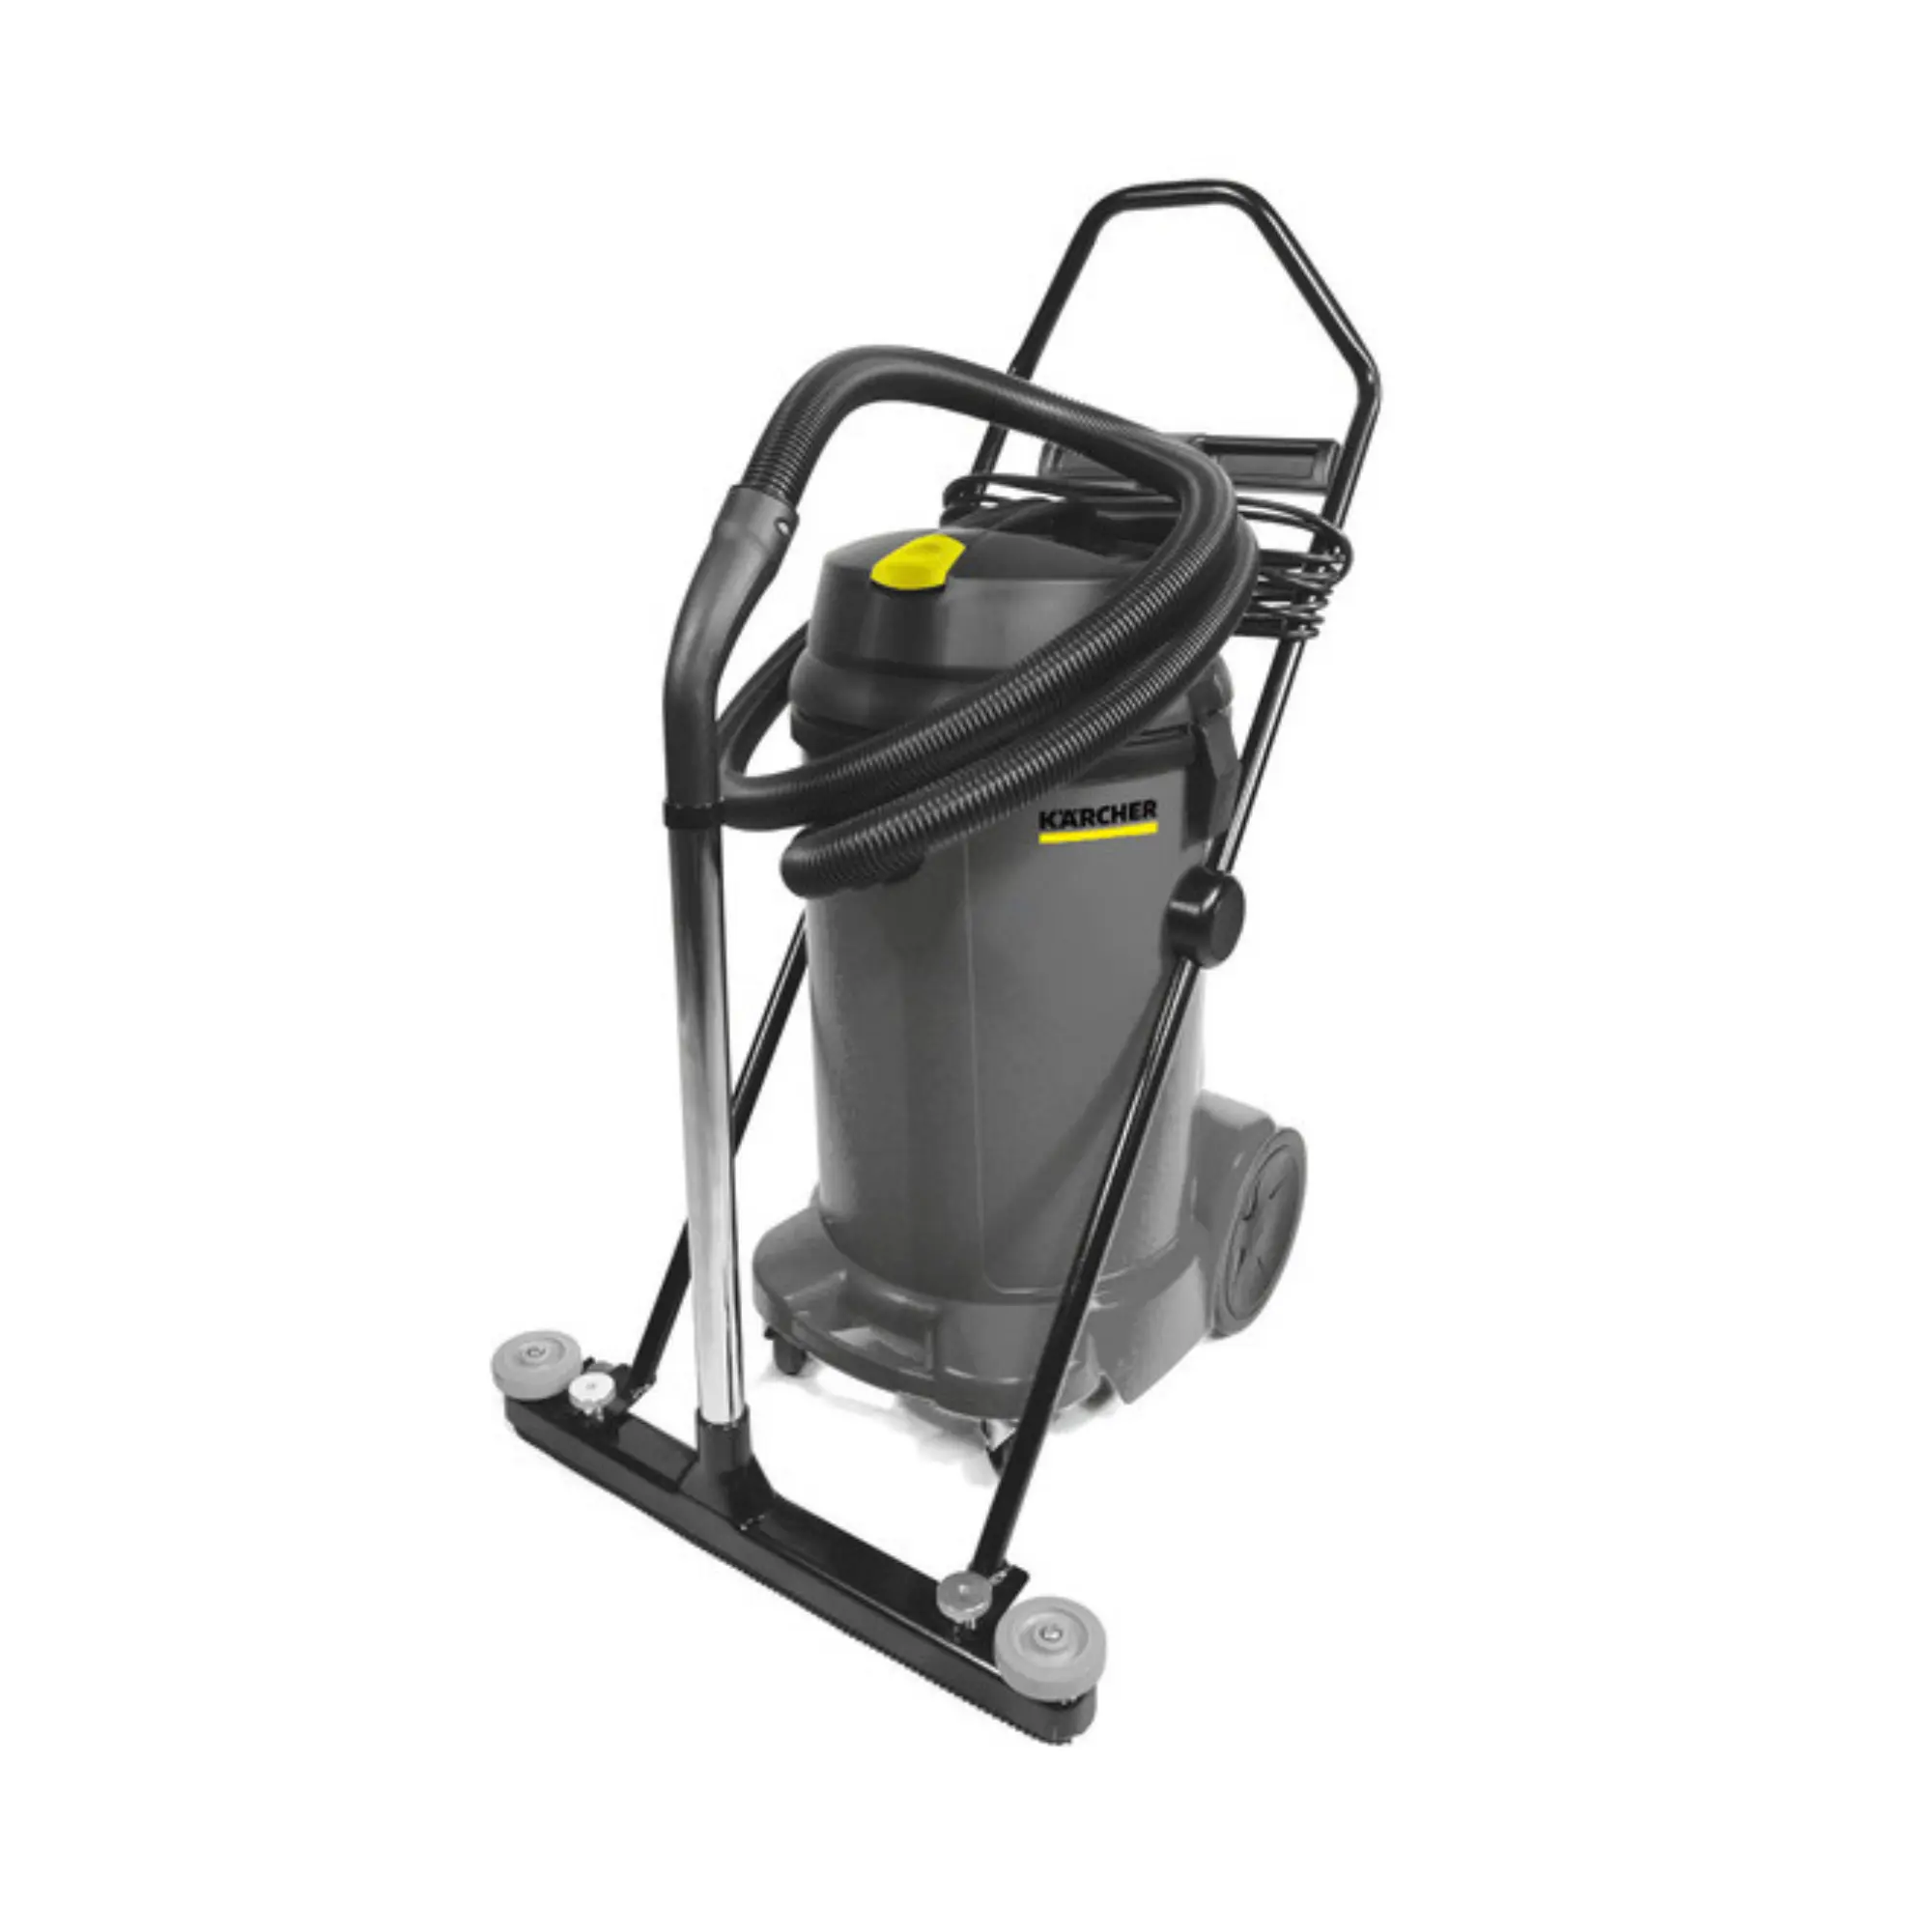 Karcher Wet Dry vacuum with Front mount Squeegee.